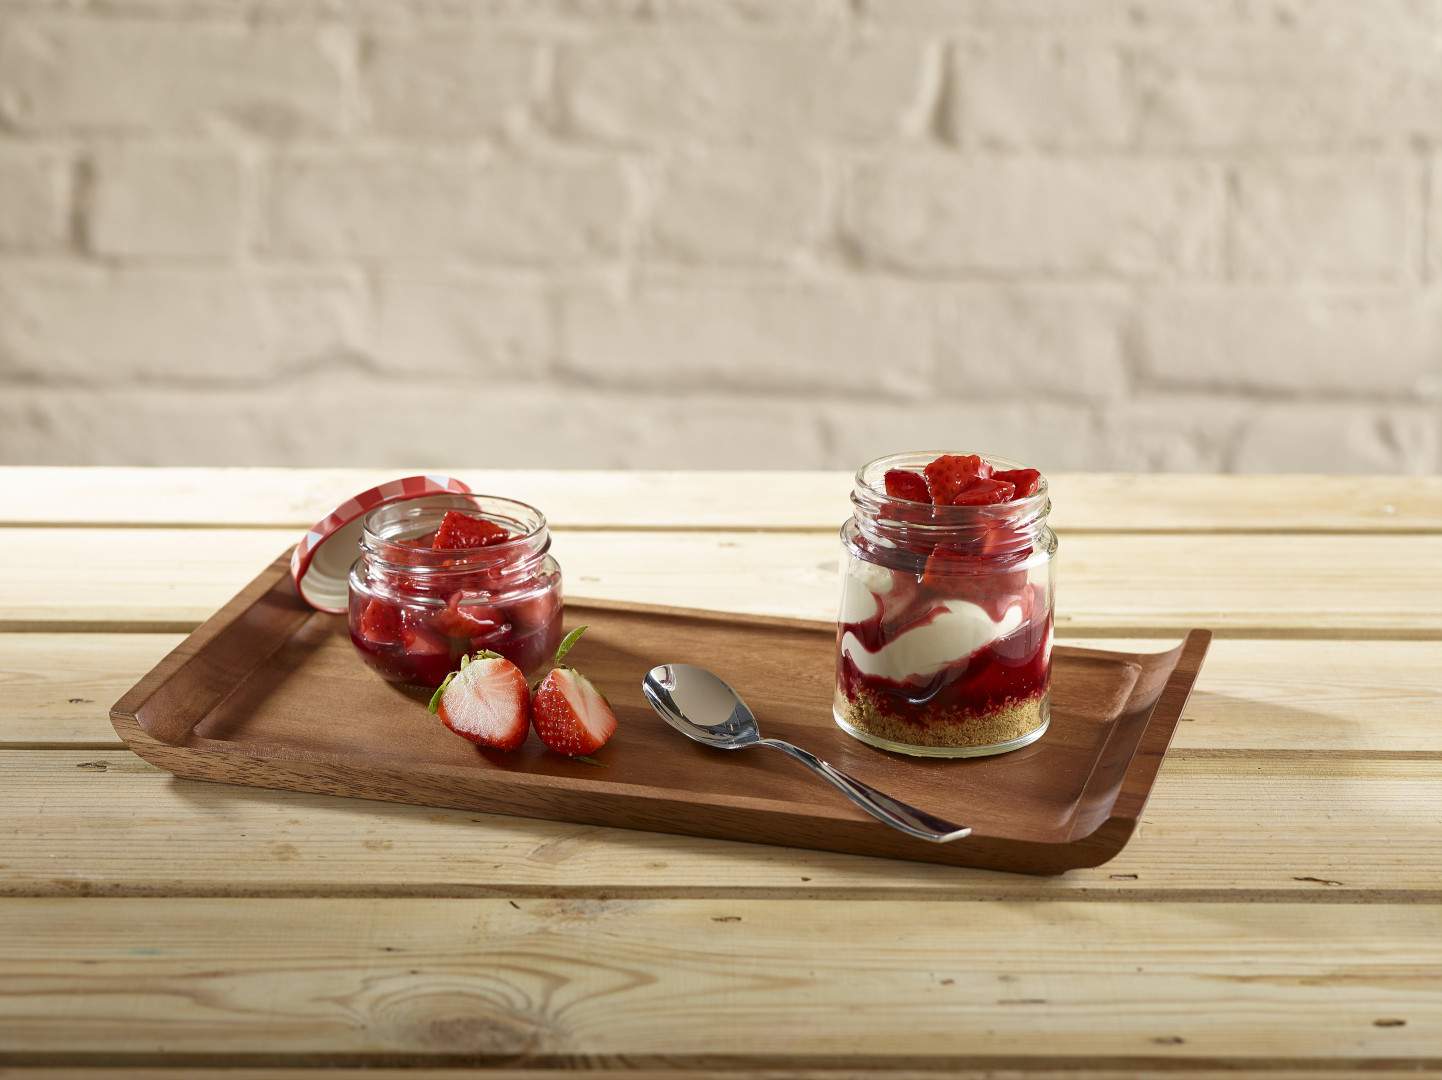 Acacia Wood Serving Platter with Stawberries and Cream